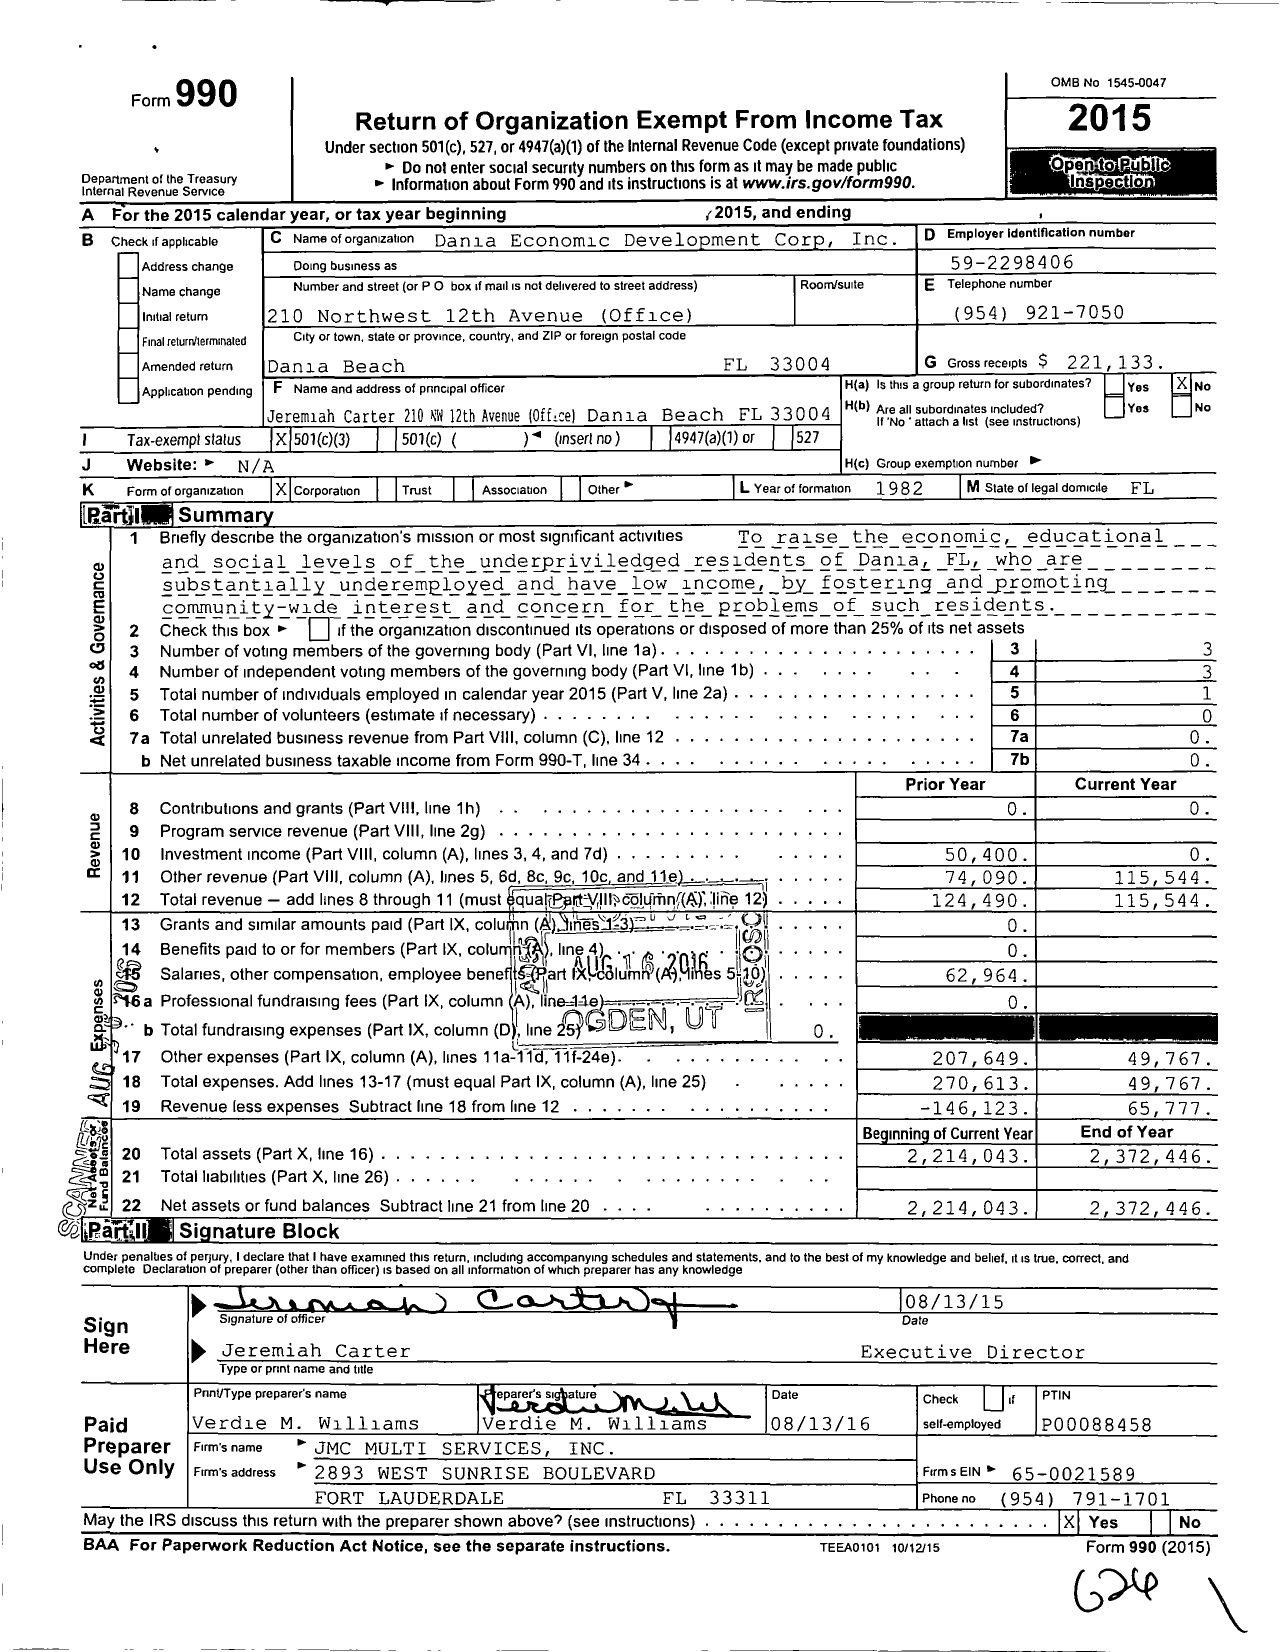 Image of first page of 2015 Form 990 for Dania Economic Development Corporation